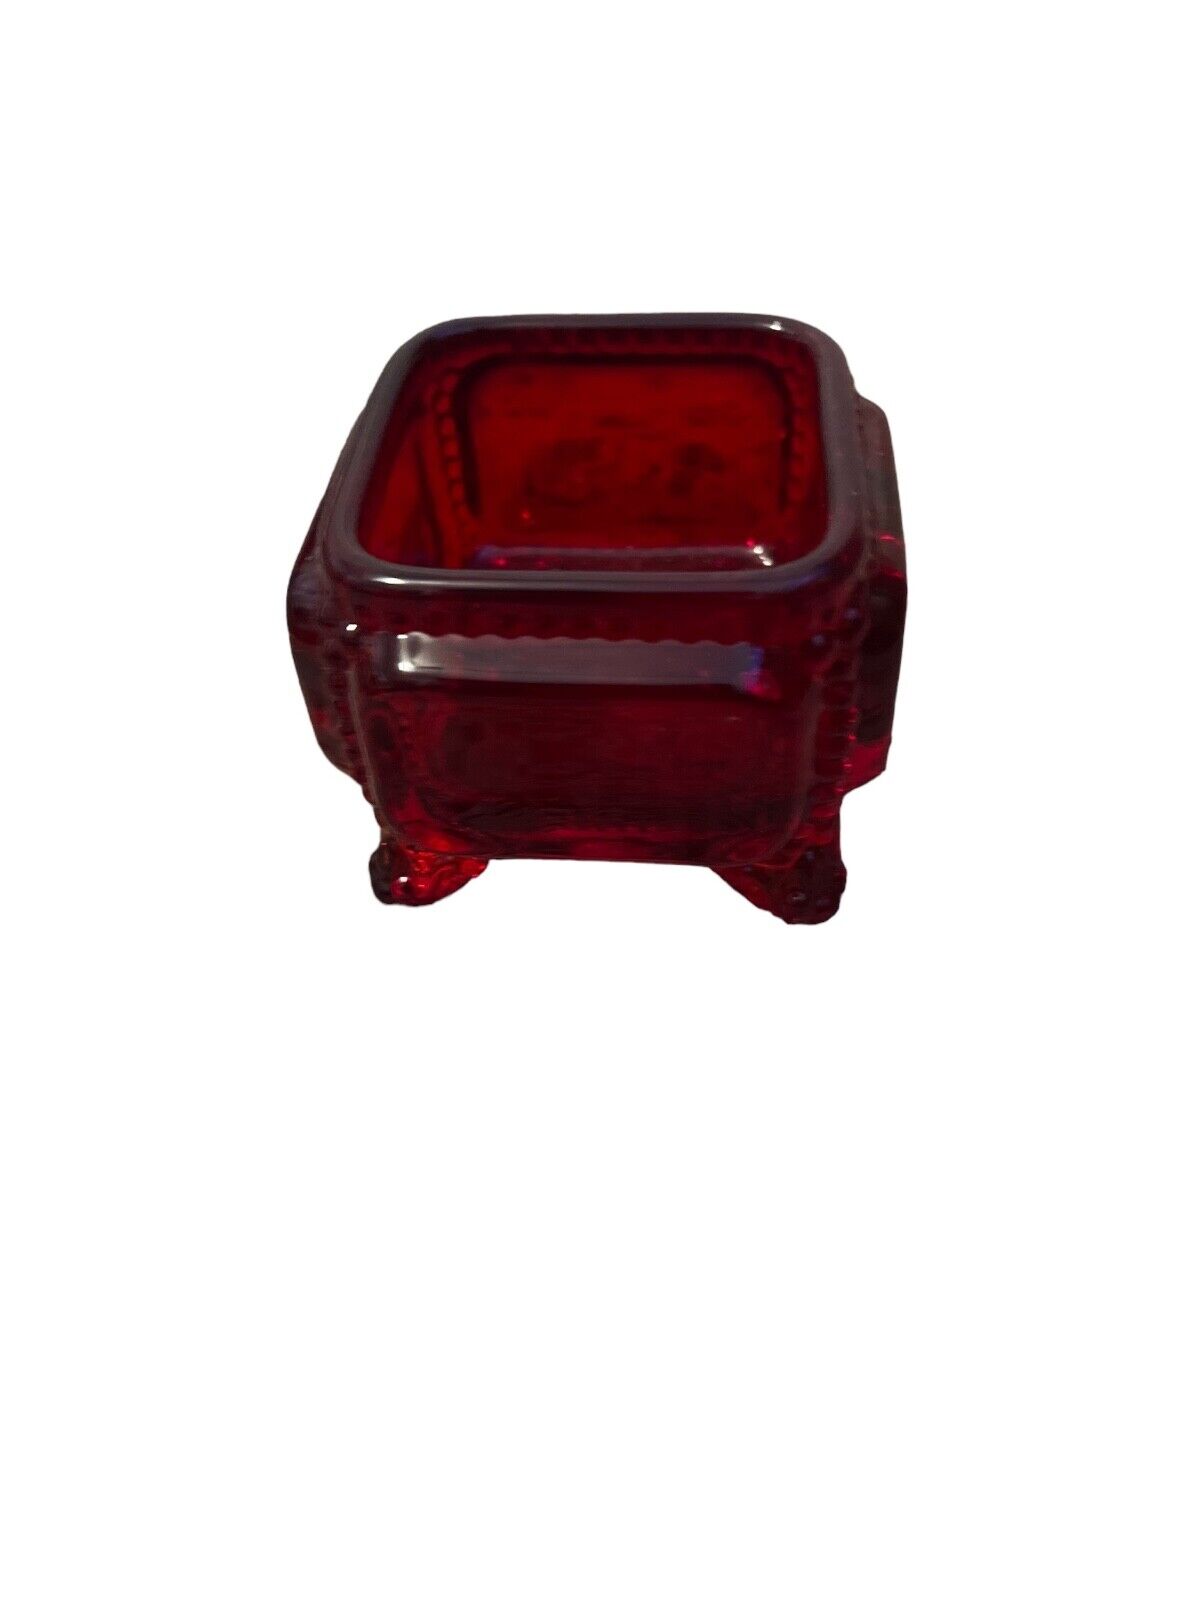 Vintage Westmoreland Footed Trinket Box, Ring Box - Ruby Red Glass